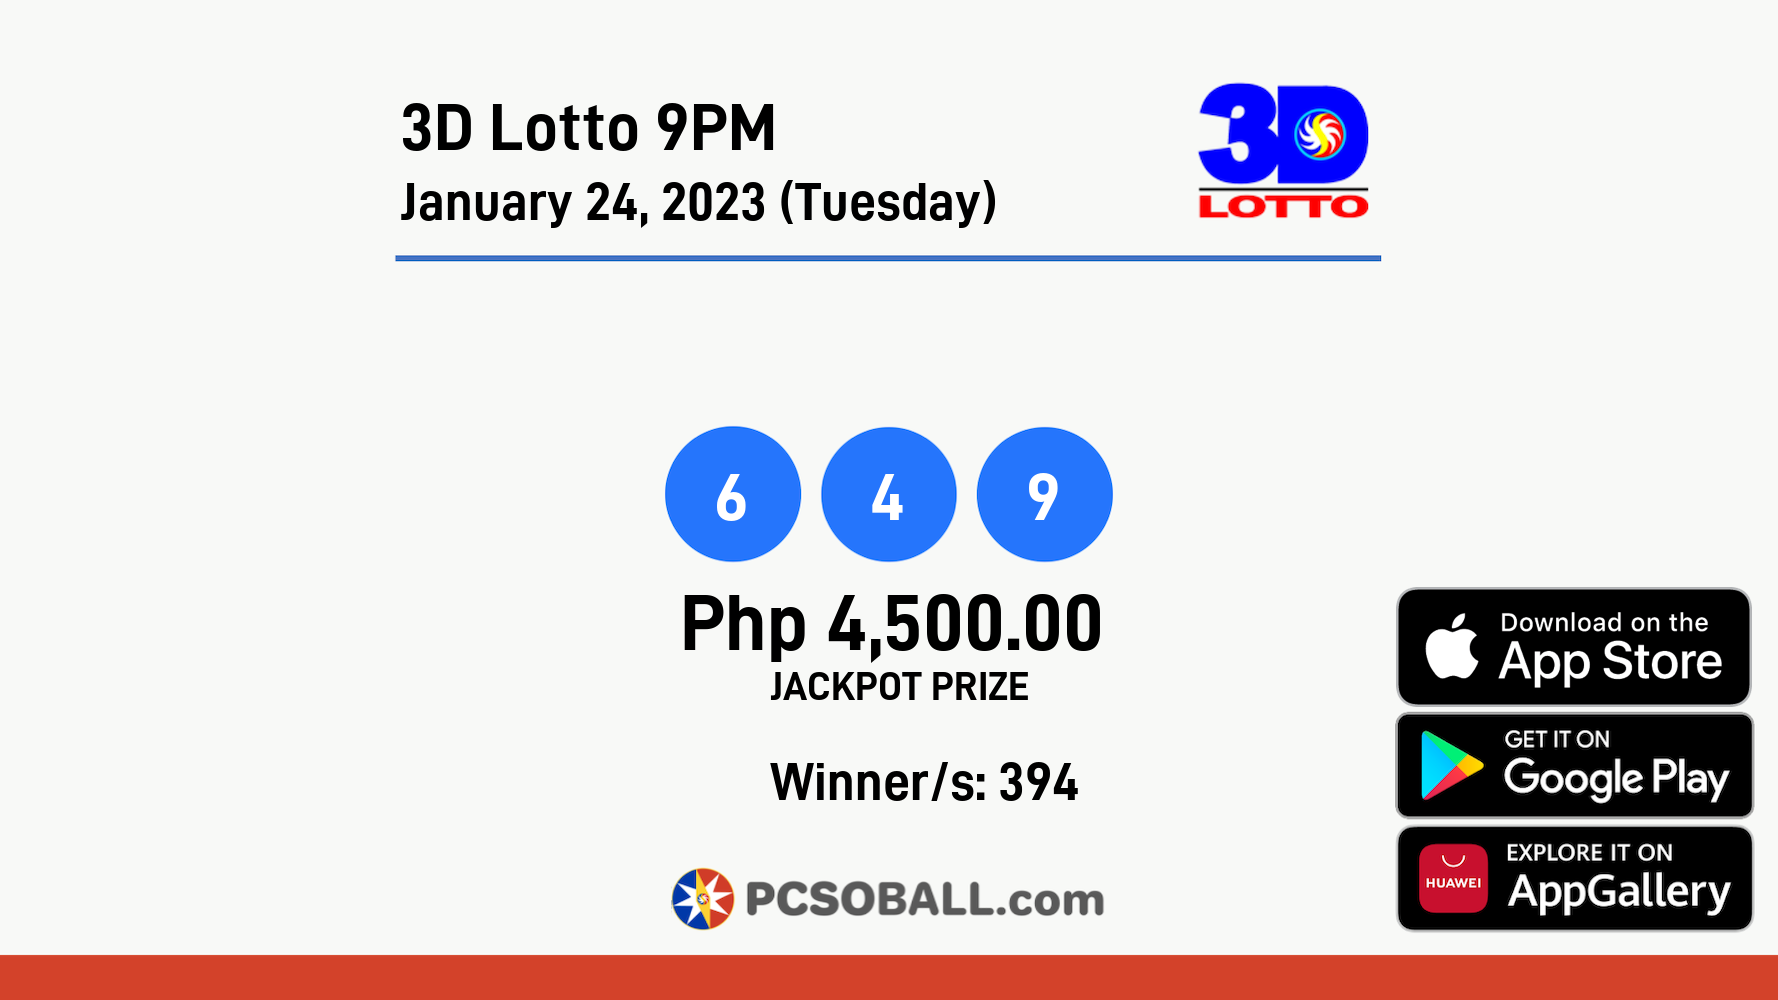 3D Lotto 9PM January 24, 2023 (Tuesday) Result